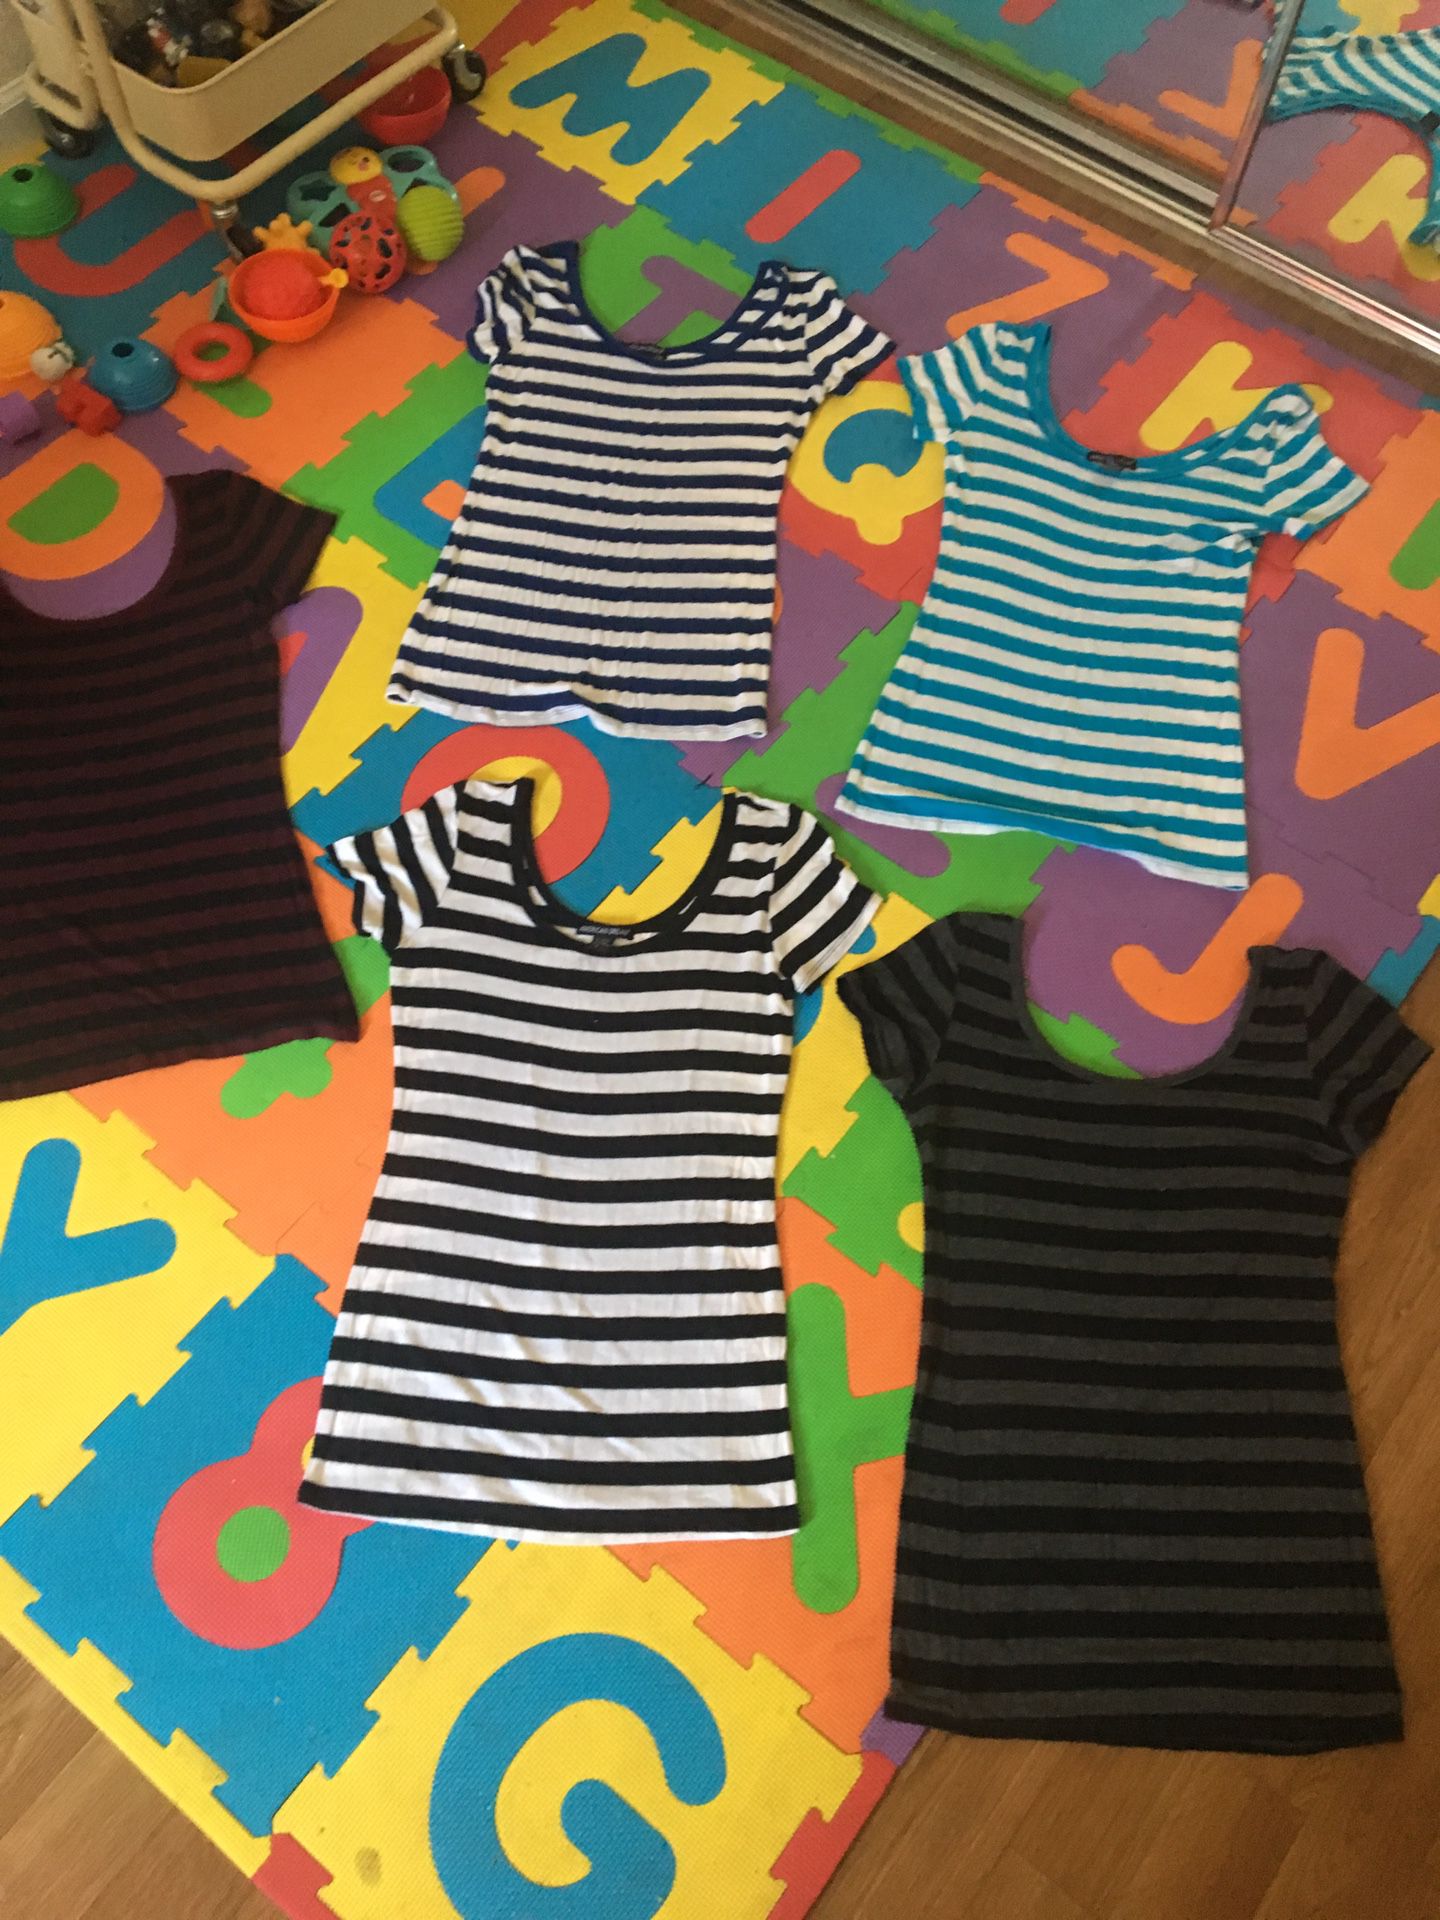 Teen large size shirts..$2each